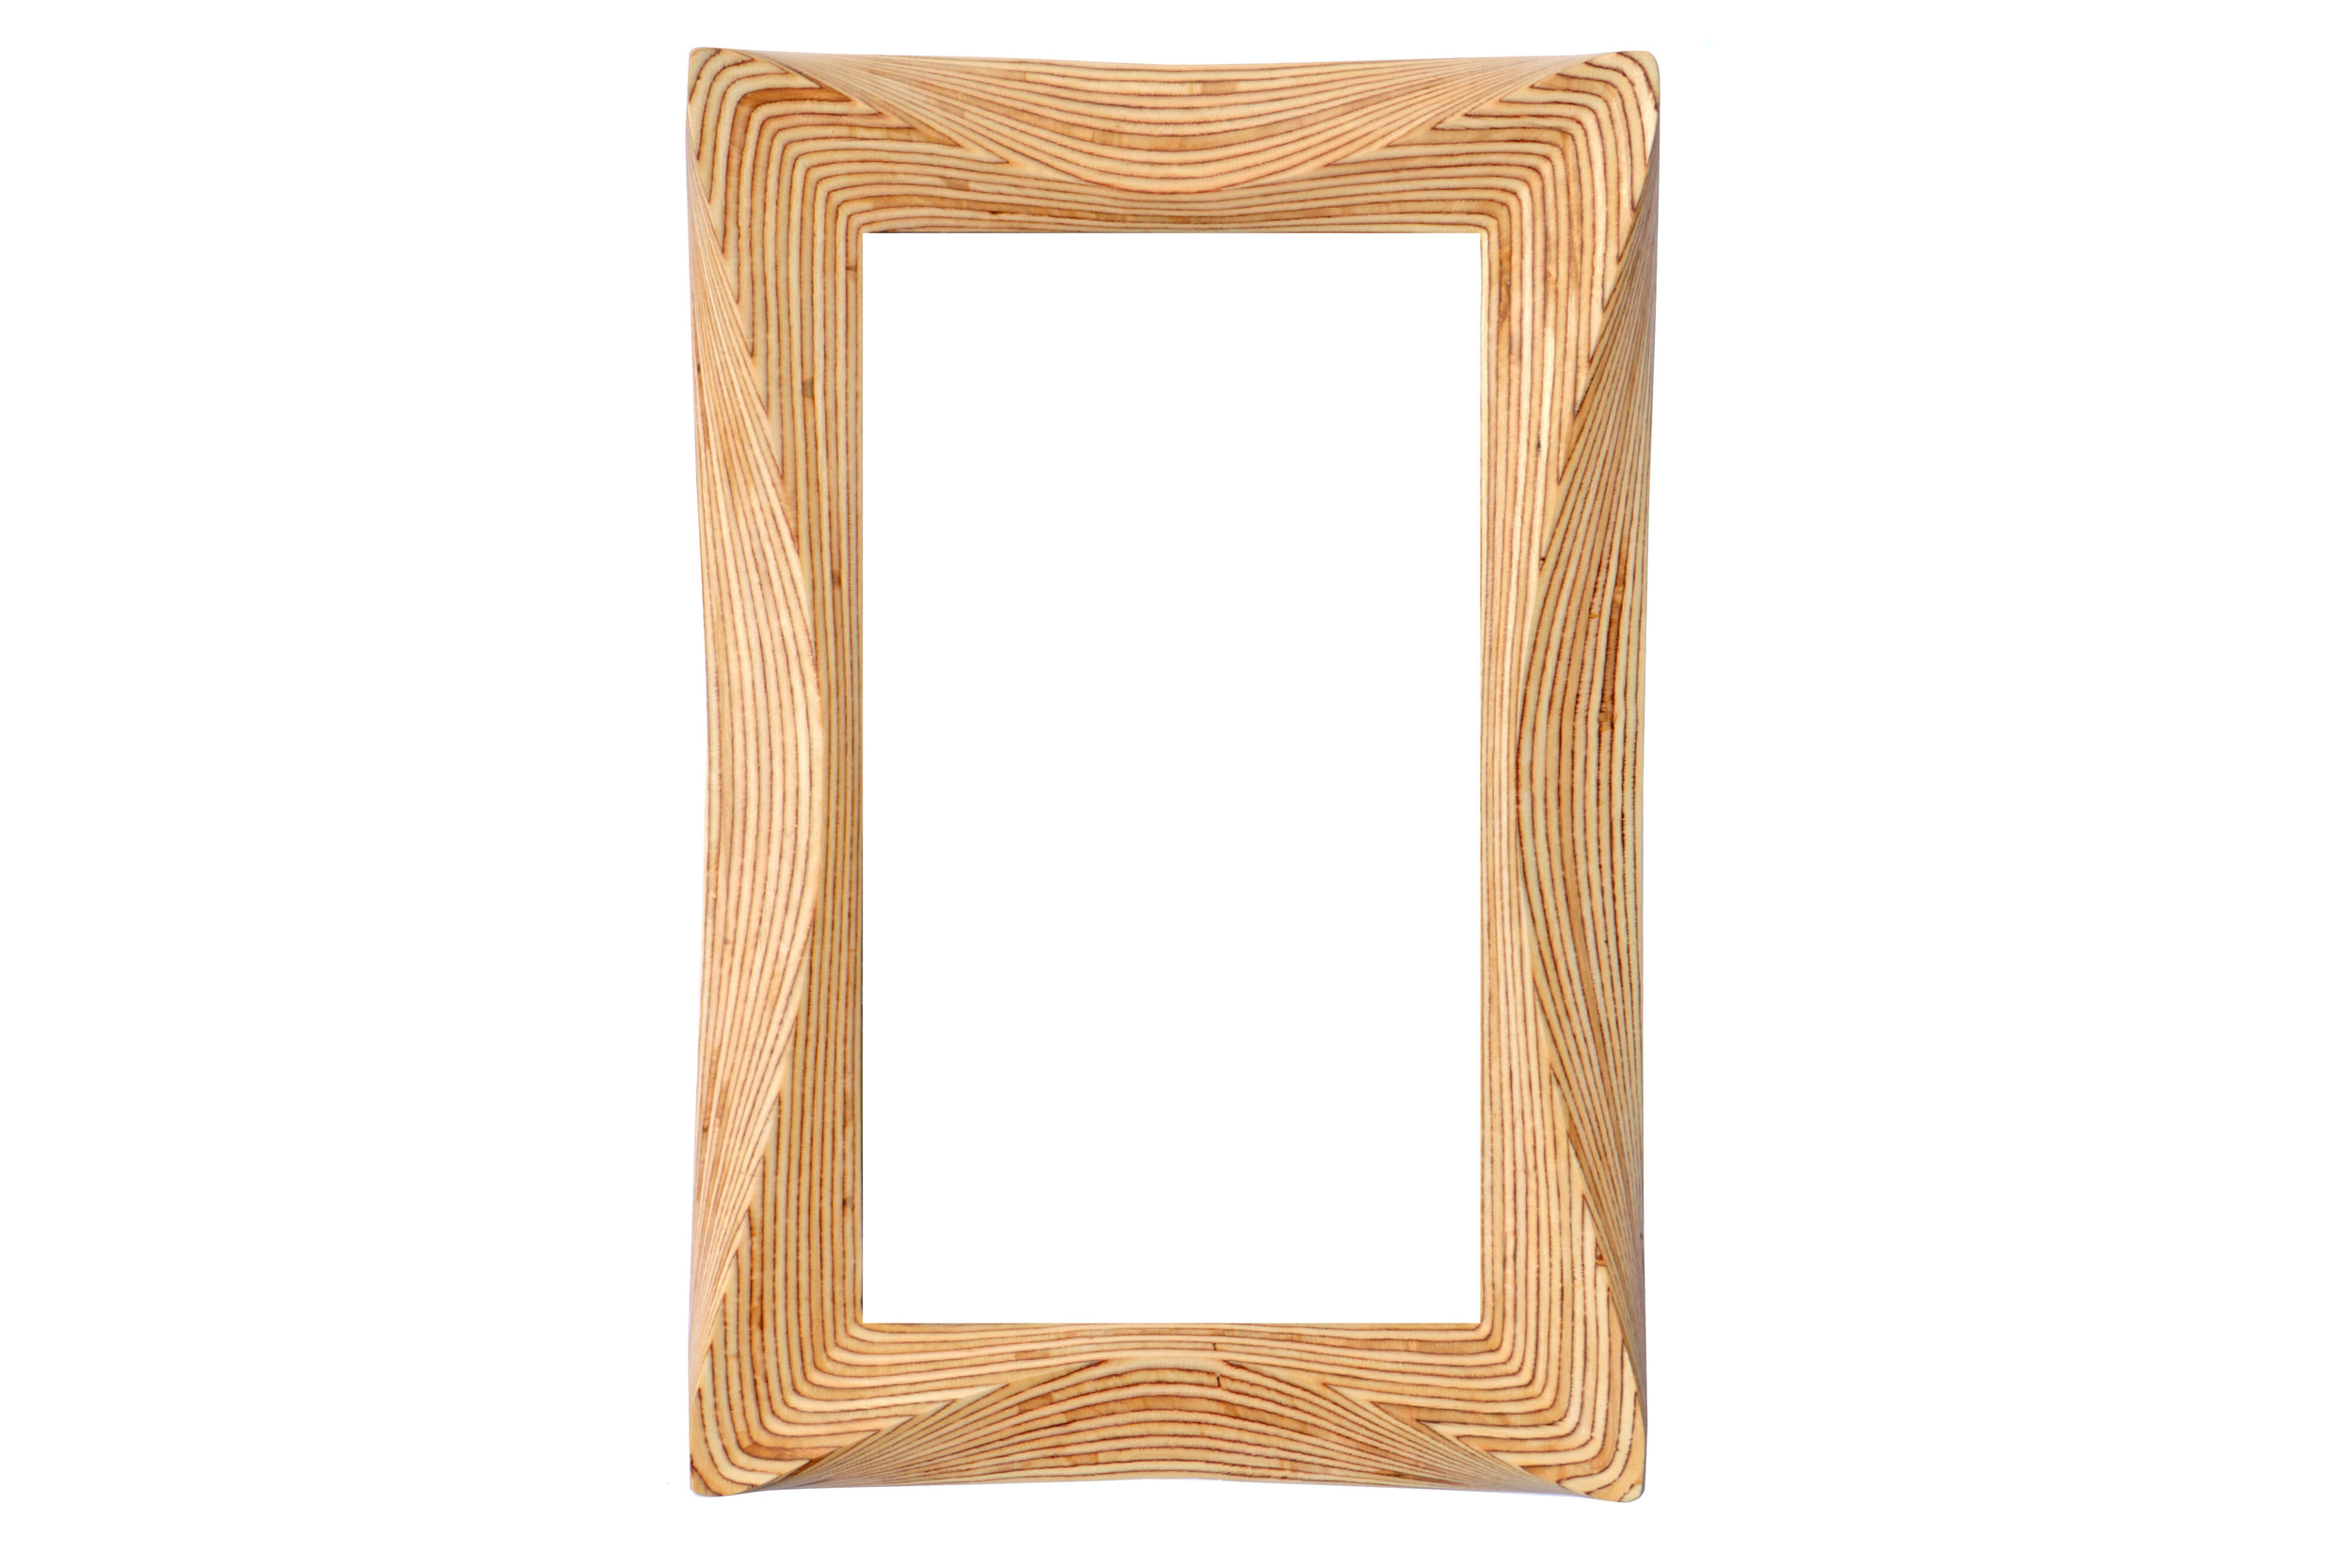 Large wooden mirror frame